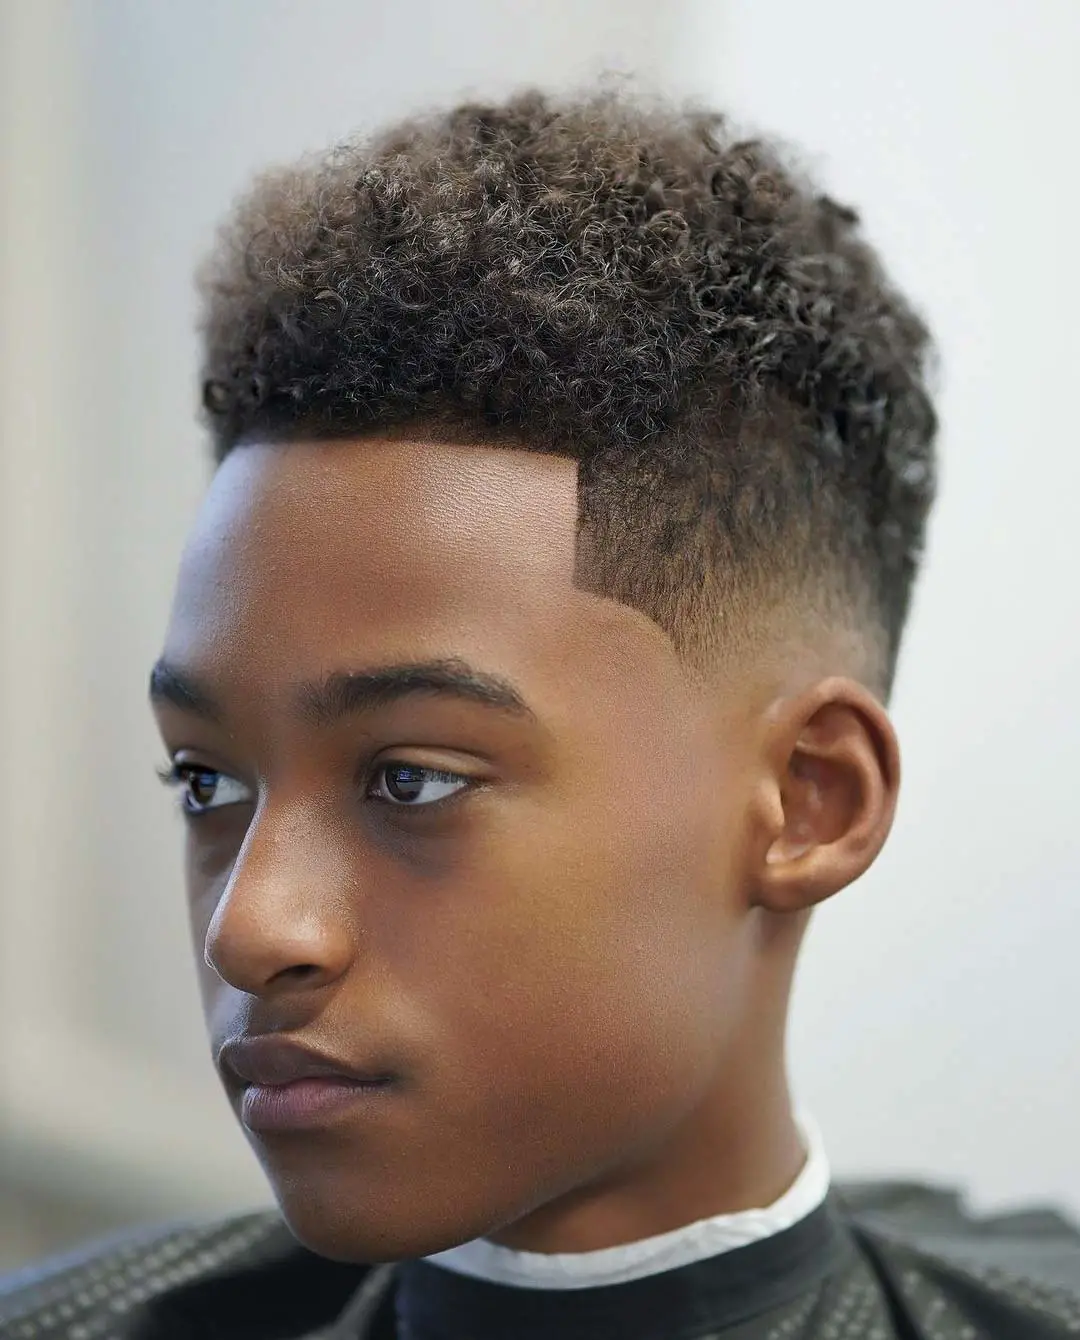 34+ Best Black Boys Haircuts & Hairstyles in 2023 - Men's Hairstyle Tips